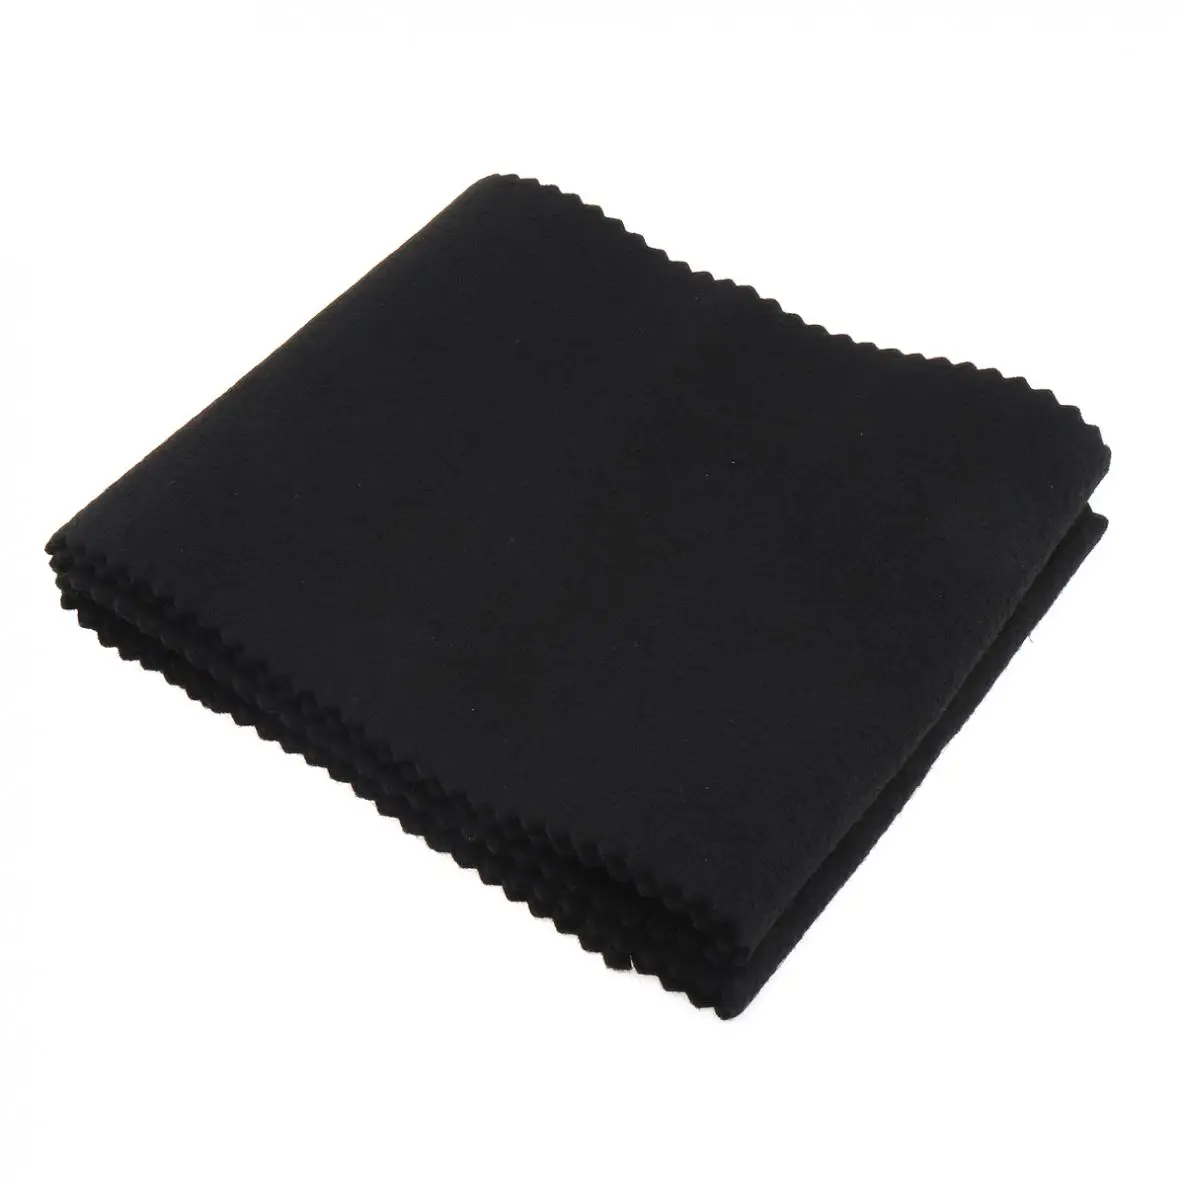 

Piano Keys Cover Keyboard Dust Covers for Any 88 Keys Piano or Keyboard